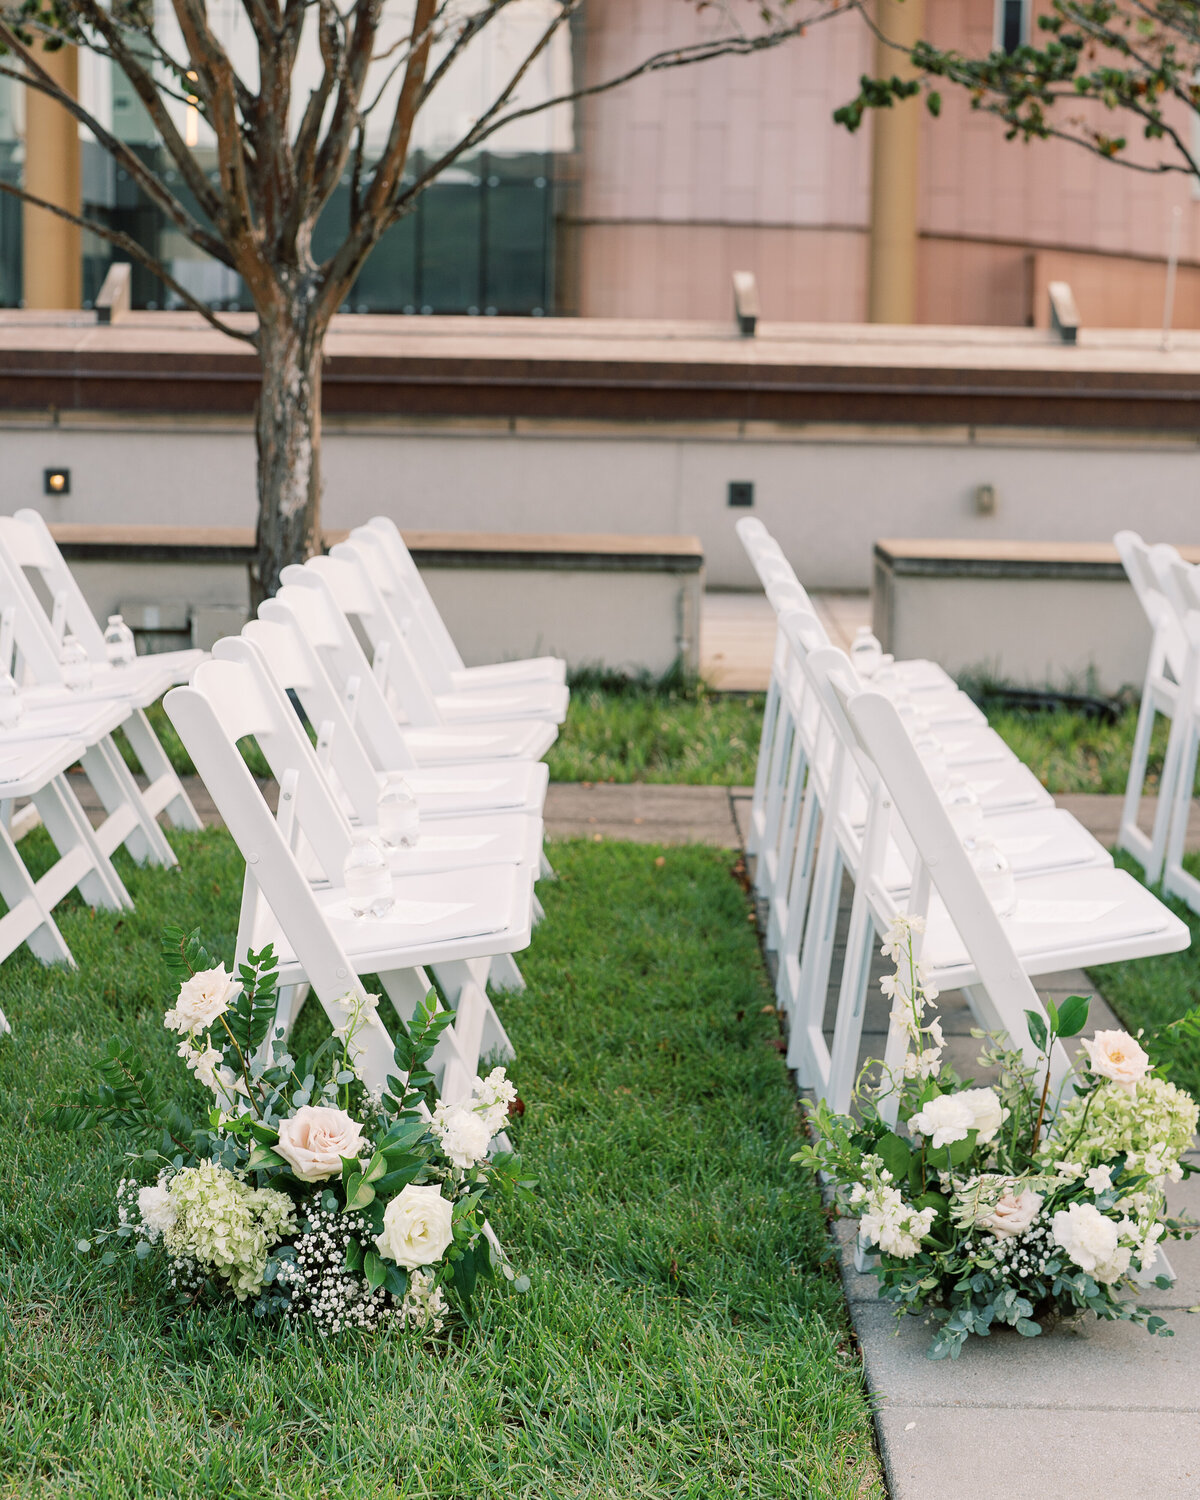 Garden-inspired floral aisle markers for summer wedding. Classic white and green wedding with timeless garden-inspired floral design. Ceremony aisle florals for summer wedding in downtown Nashville. Design by Rosemary & Finch Floral Design in Nashville, TN.